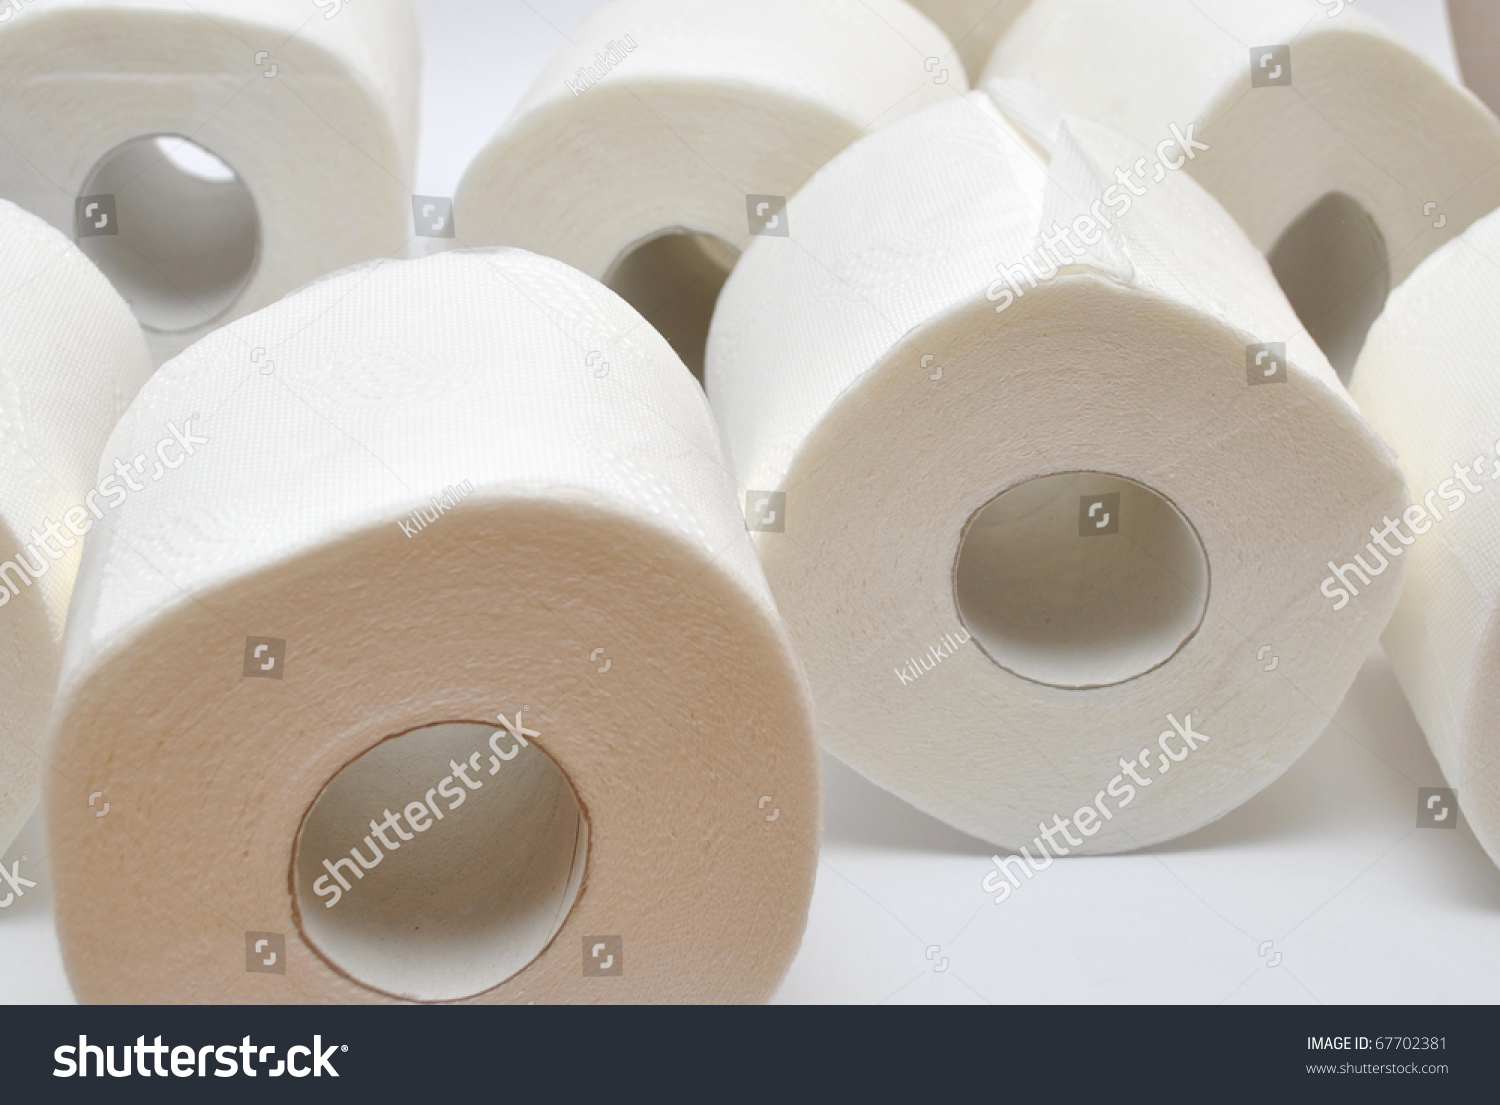 Rolls Of Grey Toilet Paper From The Recycling Stock Photo 67702381 ...